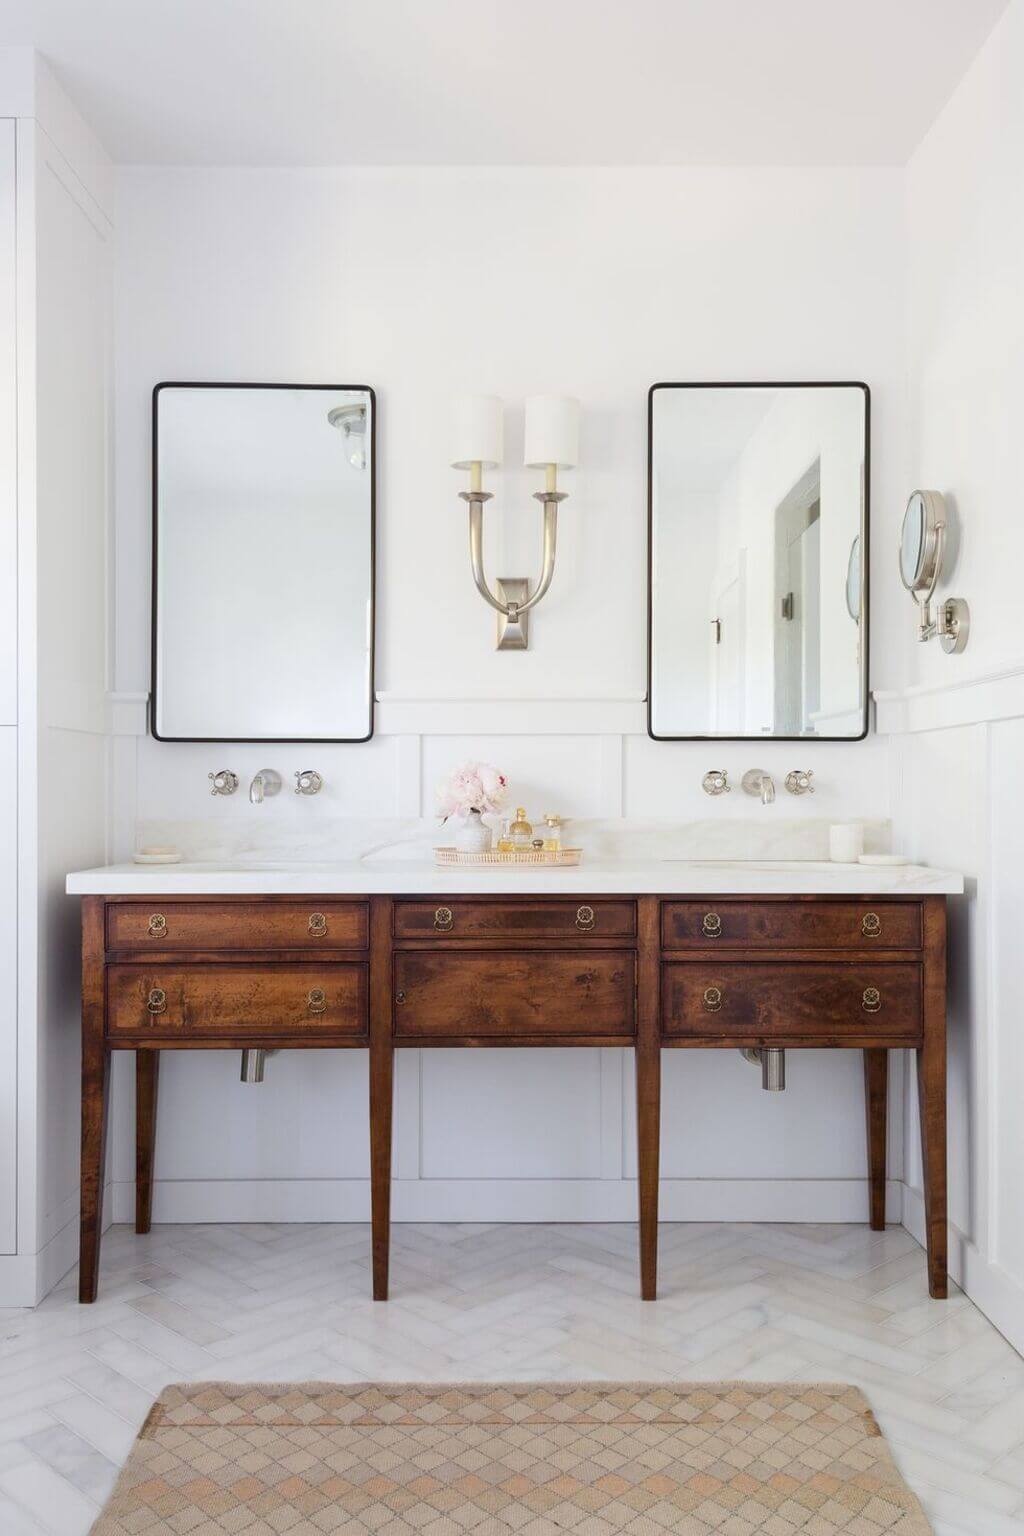 A bathroom with two mirrors and two sinks
